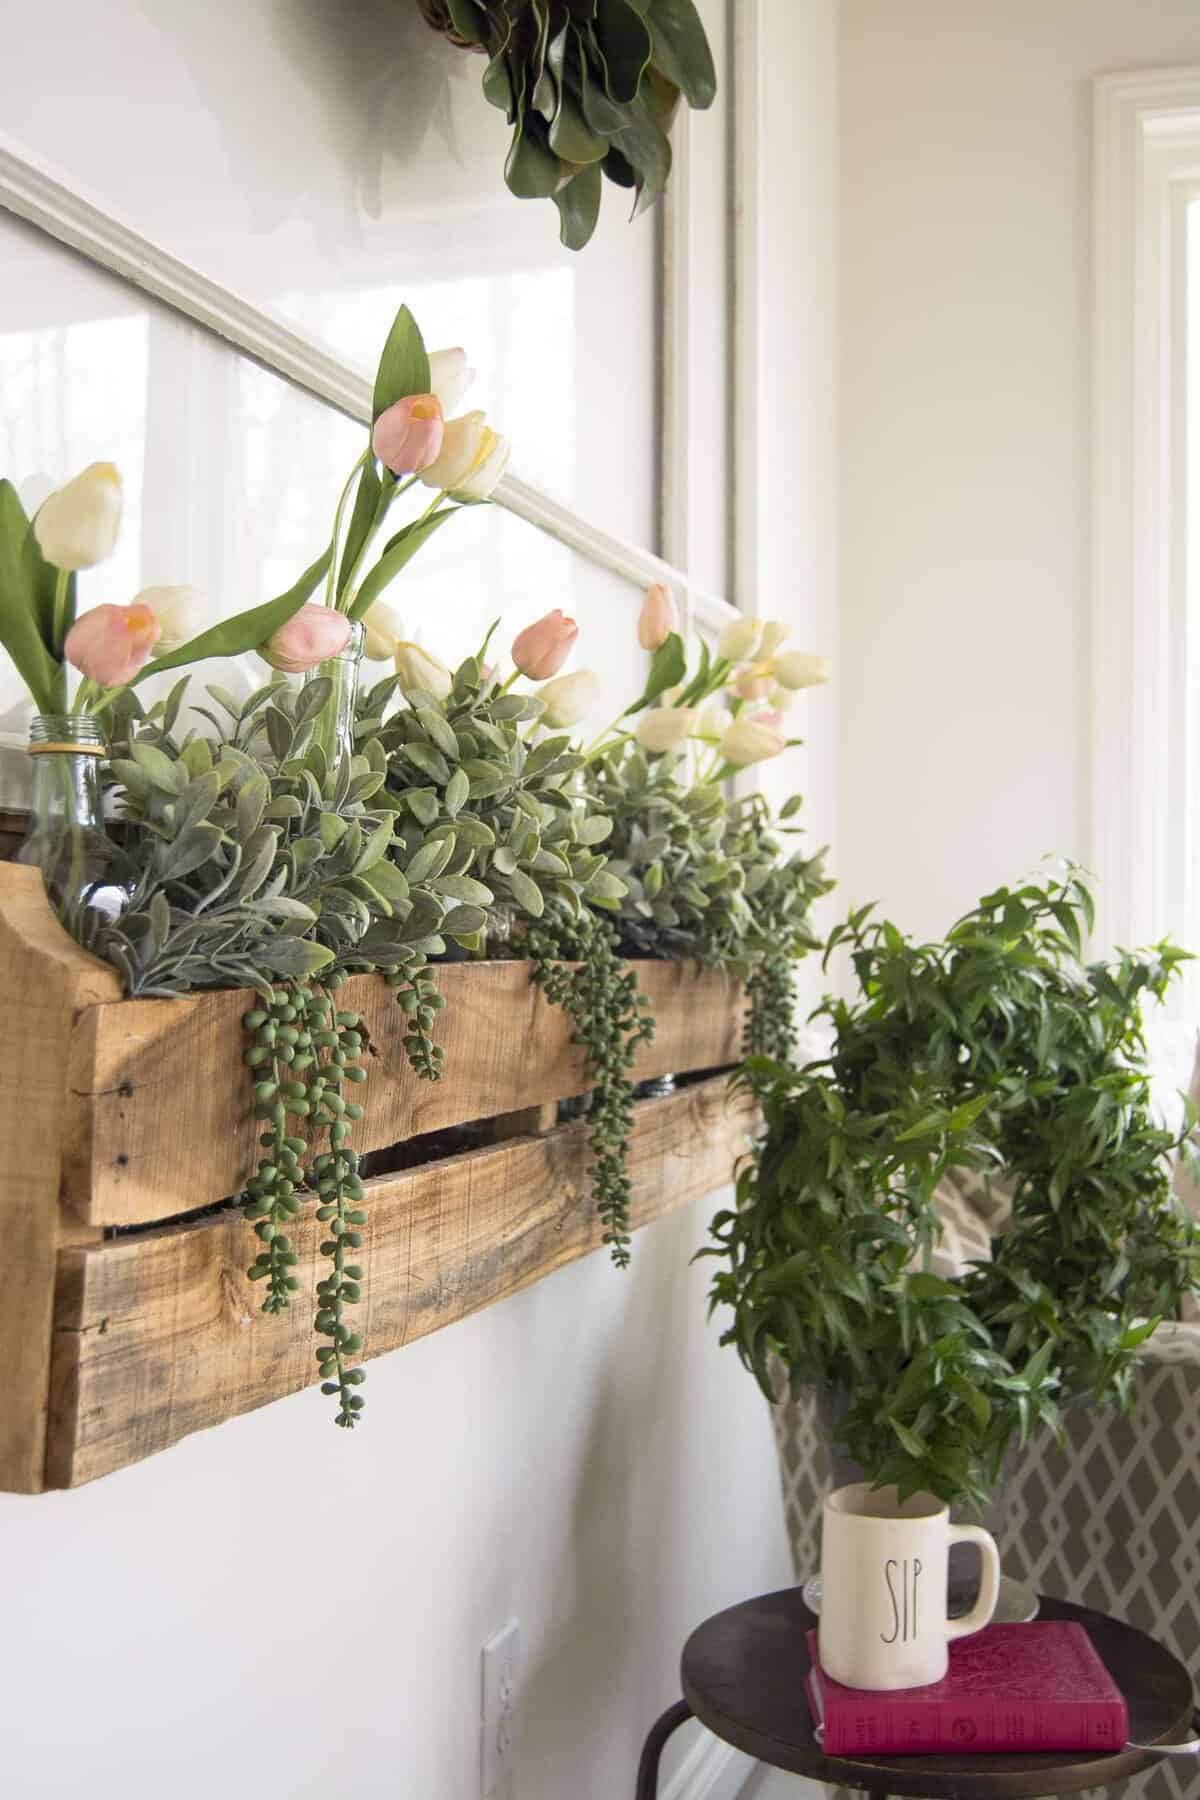 Are you looking for an easy way to bring the outdoors in without any fuss? Today I'm sharing my indoor faux window box idea for how to create an outdoor space right inside your home. No dirt. No watering. No sun needed.